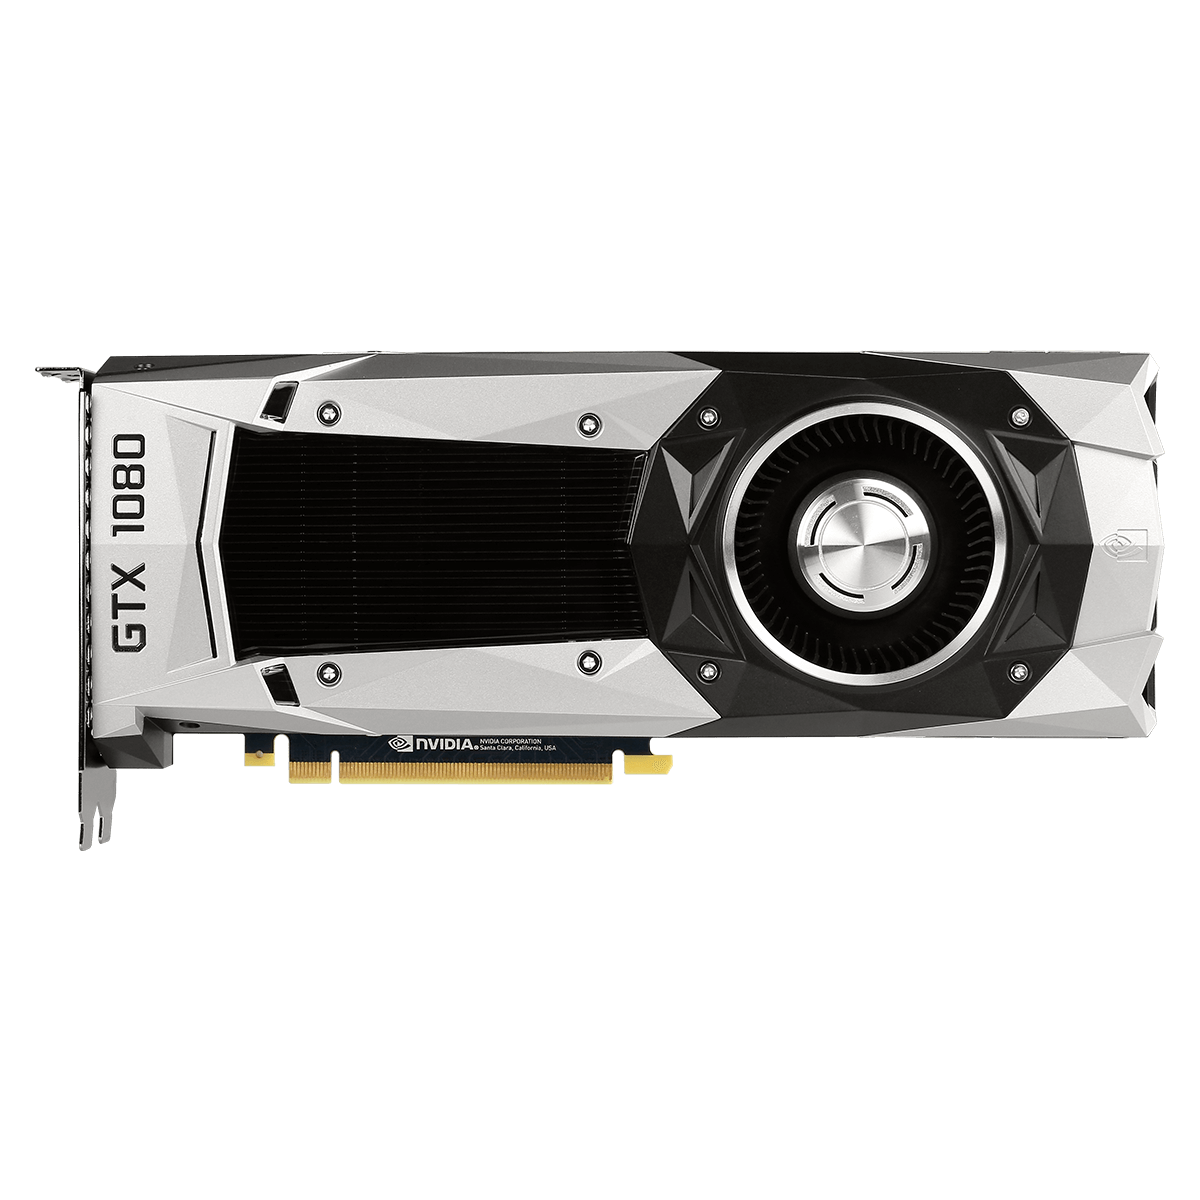 EVGA - Asia - Products - EVGA GeForce GTX 1080 FOUNDERS EDITION, 08G-P4 ...